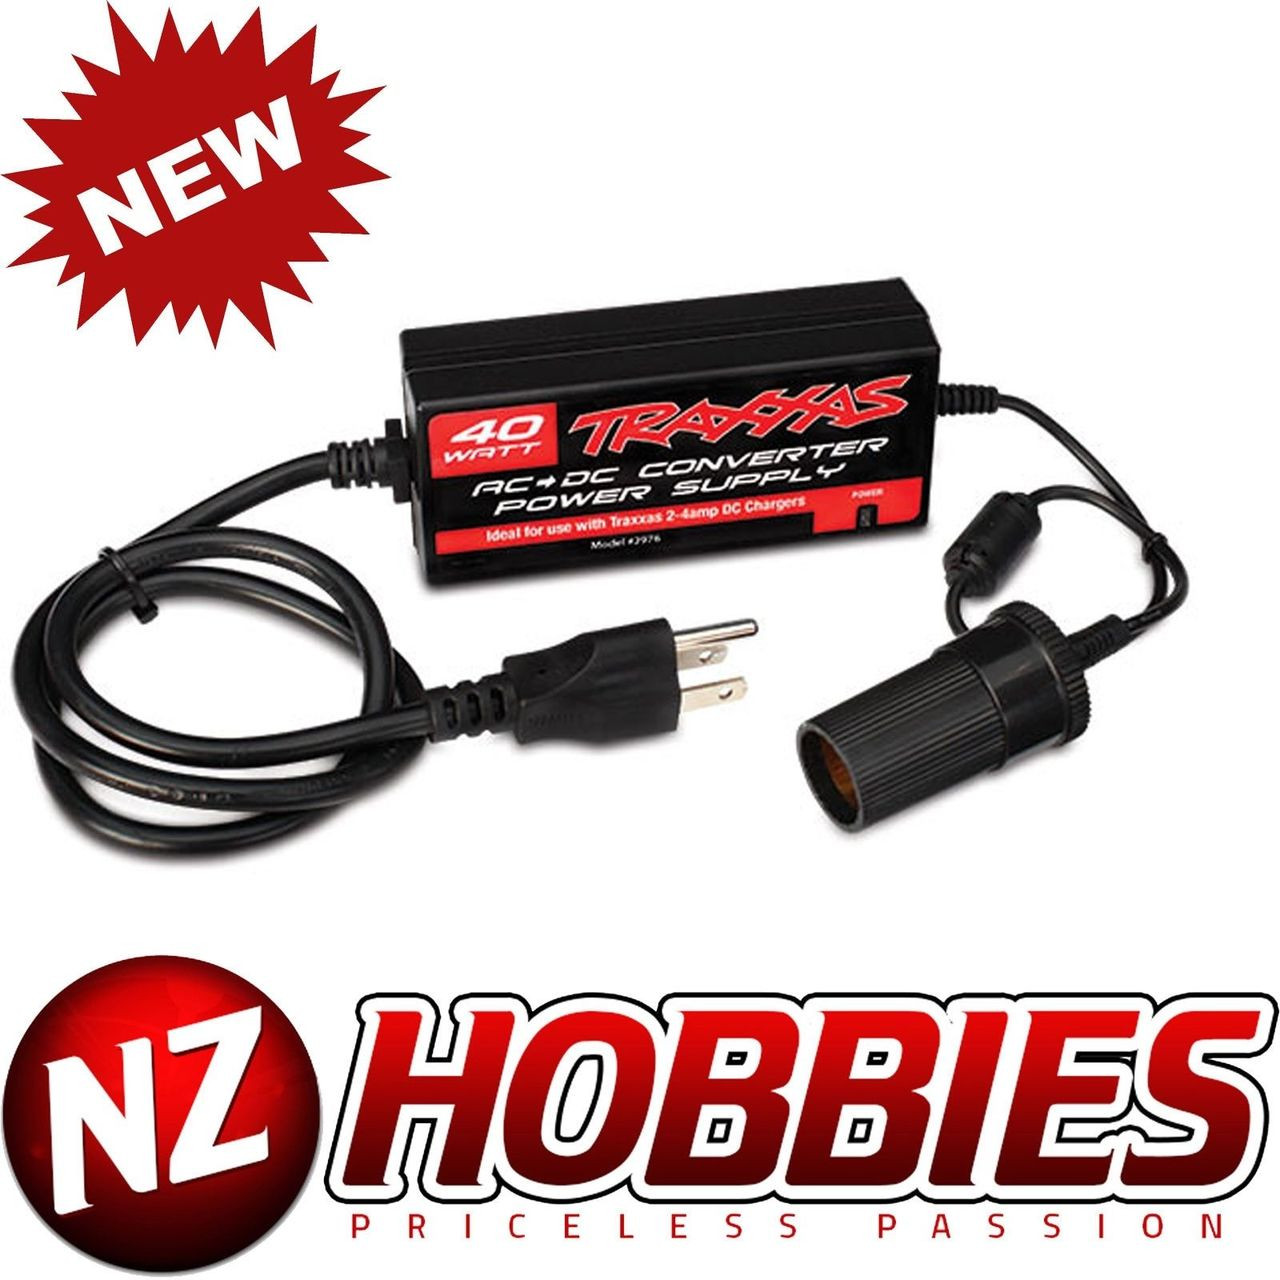 Traxxas 2976 AC to DC Power Supply Adapter for Traxxas 2-4 amp DC Chargers  - NZ HOBBIES